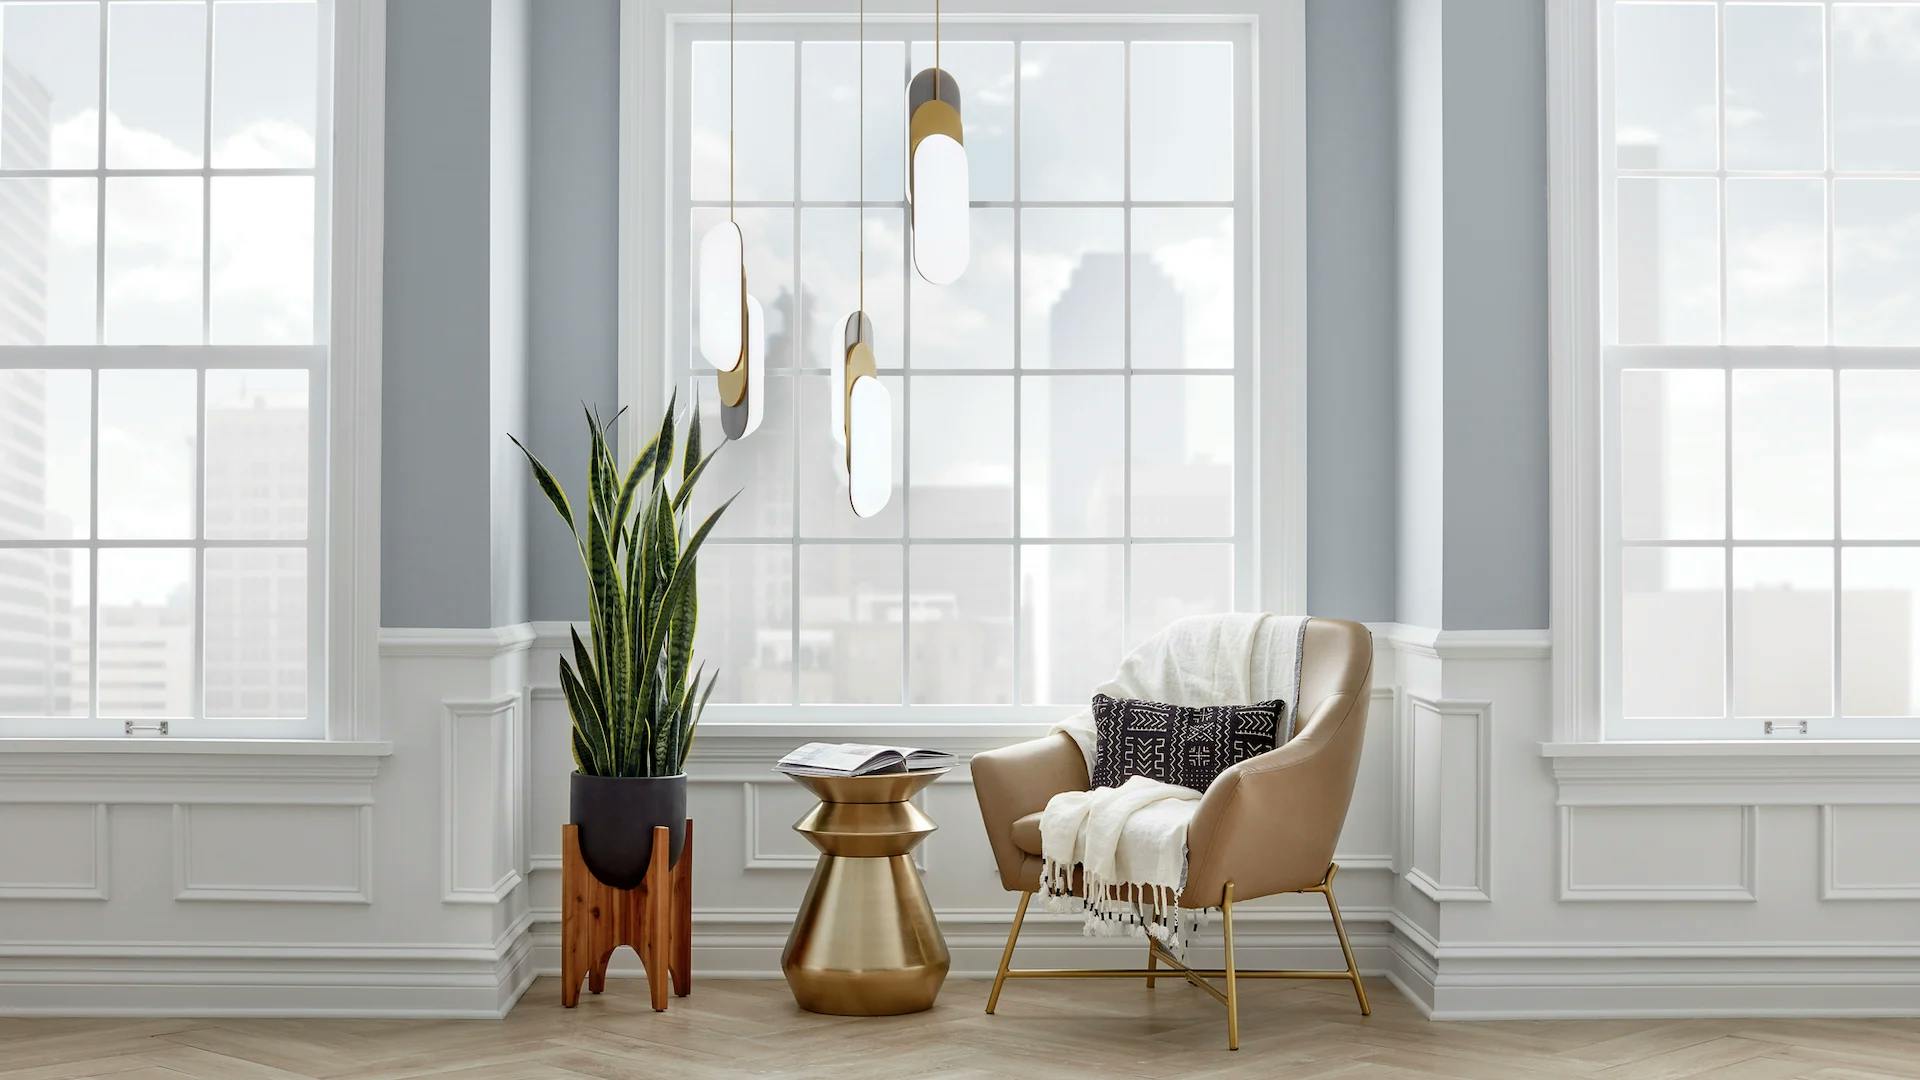 An inset window area with an accent chair, side table and plant featuring three shima pendants hanging above.